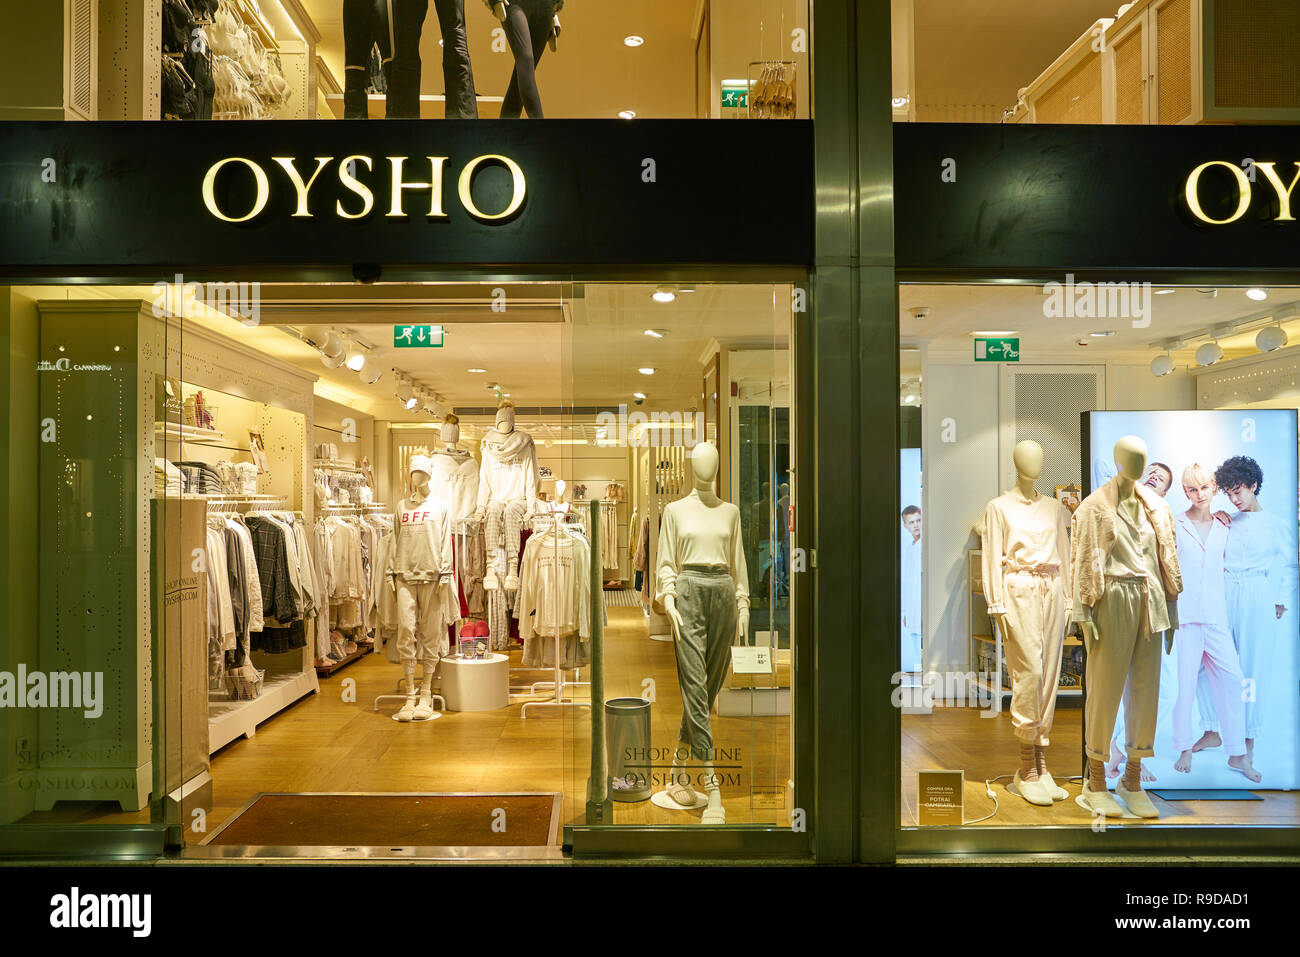 OYSHO - During Milano Design Week 2015, Oysho changes its look and